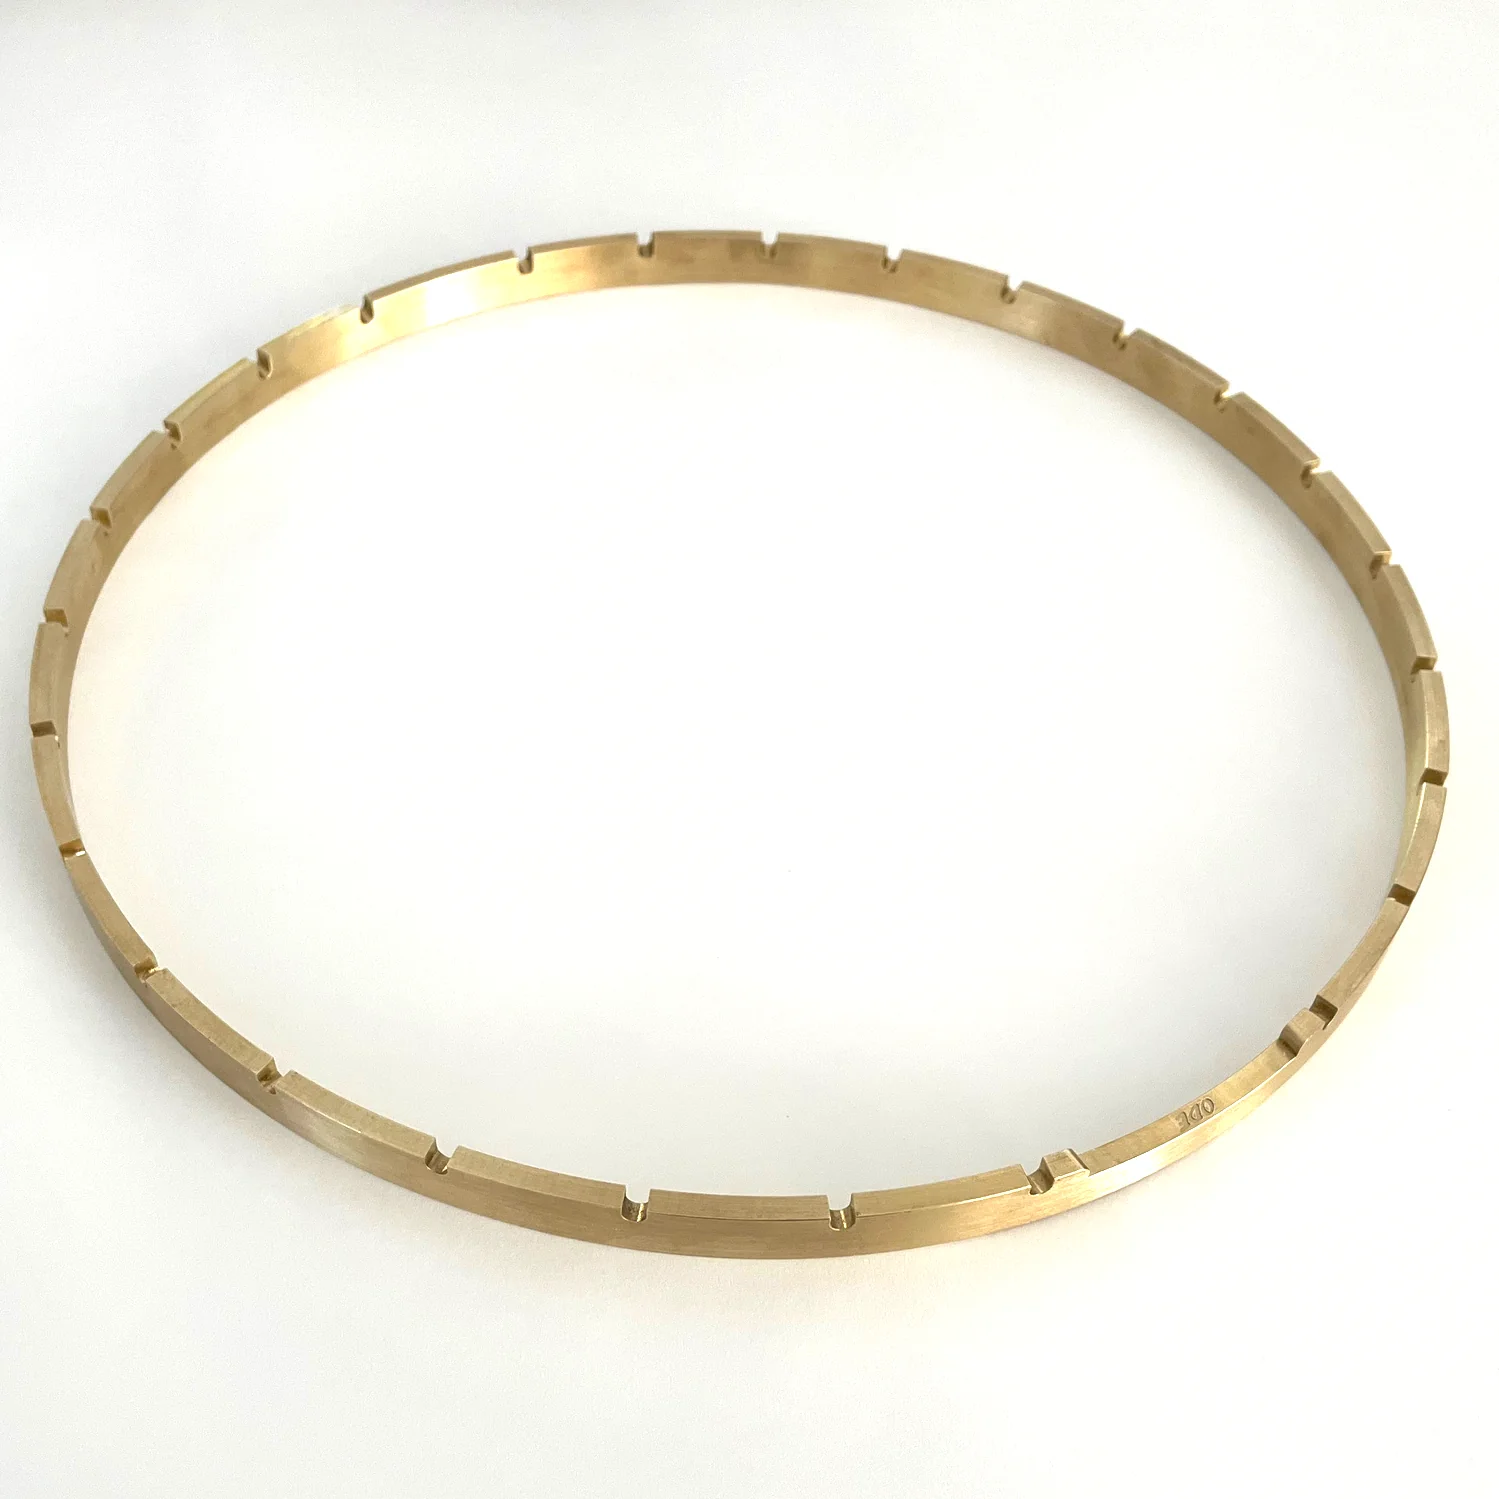 12 inch notched brass banjo tension hoop